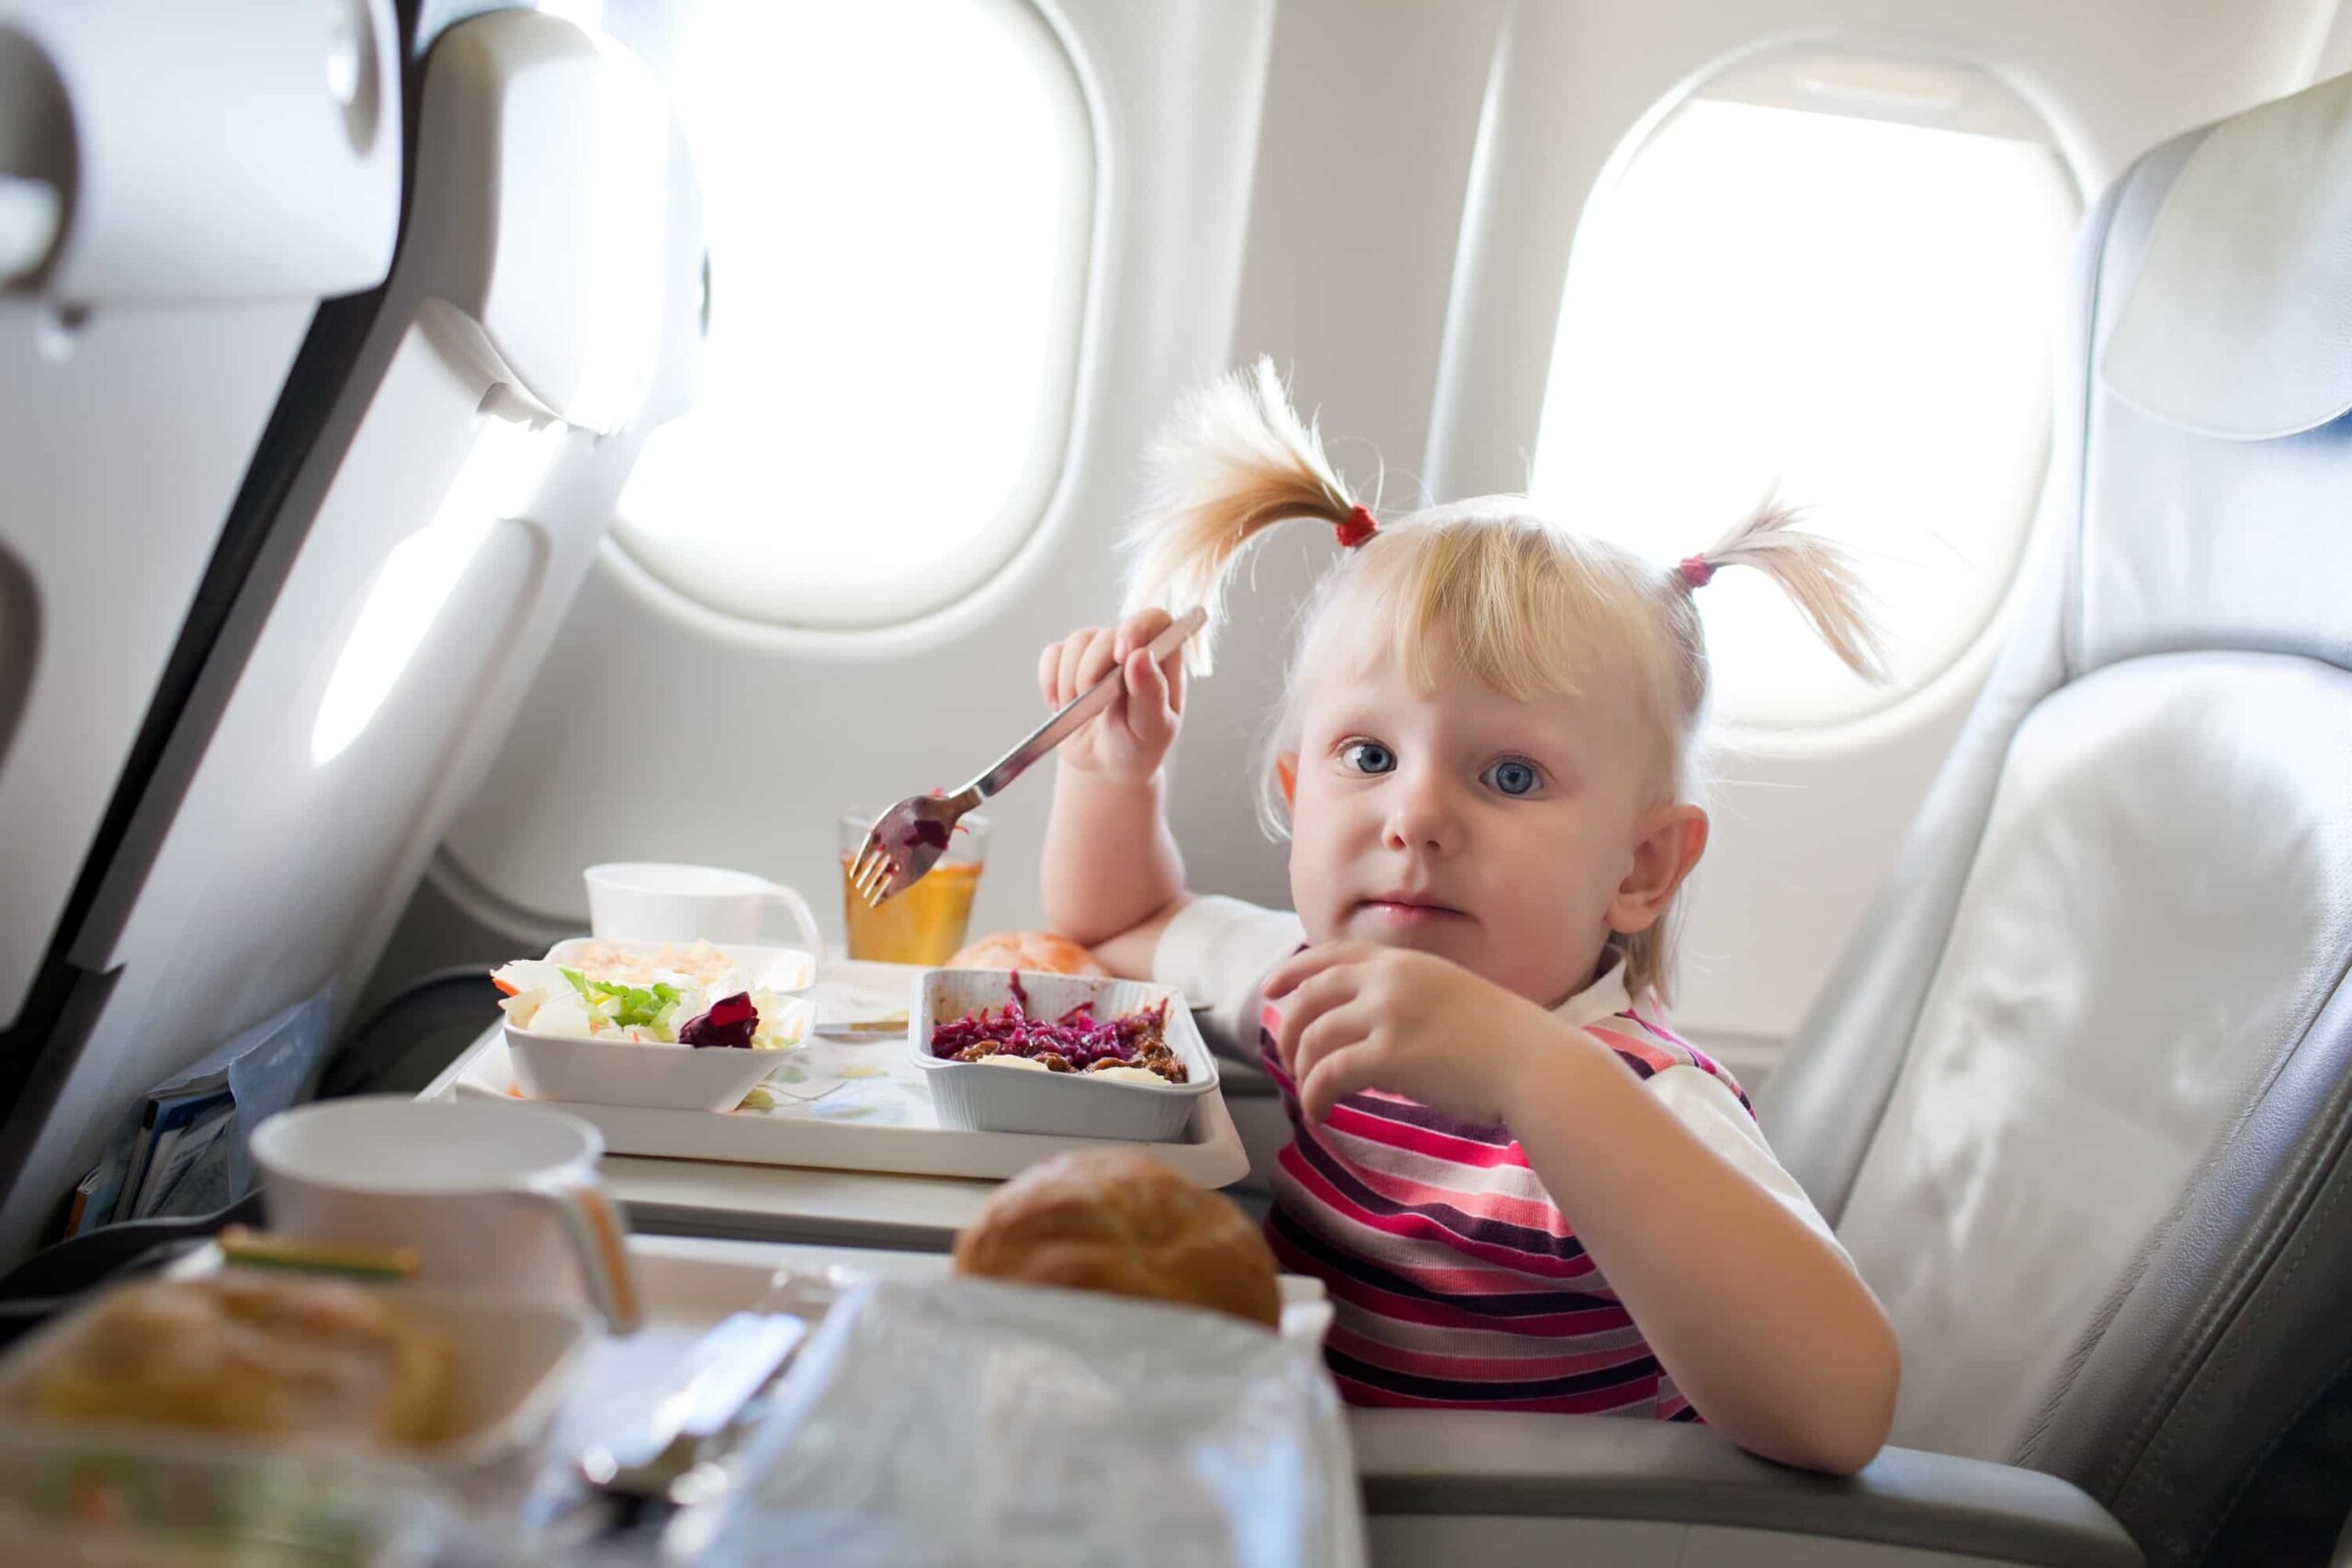 How to have a peaceful flight with young kids